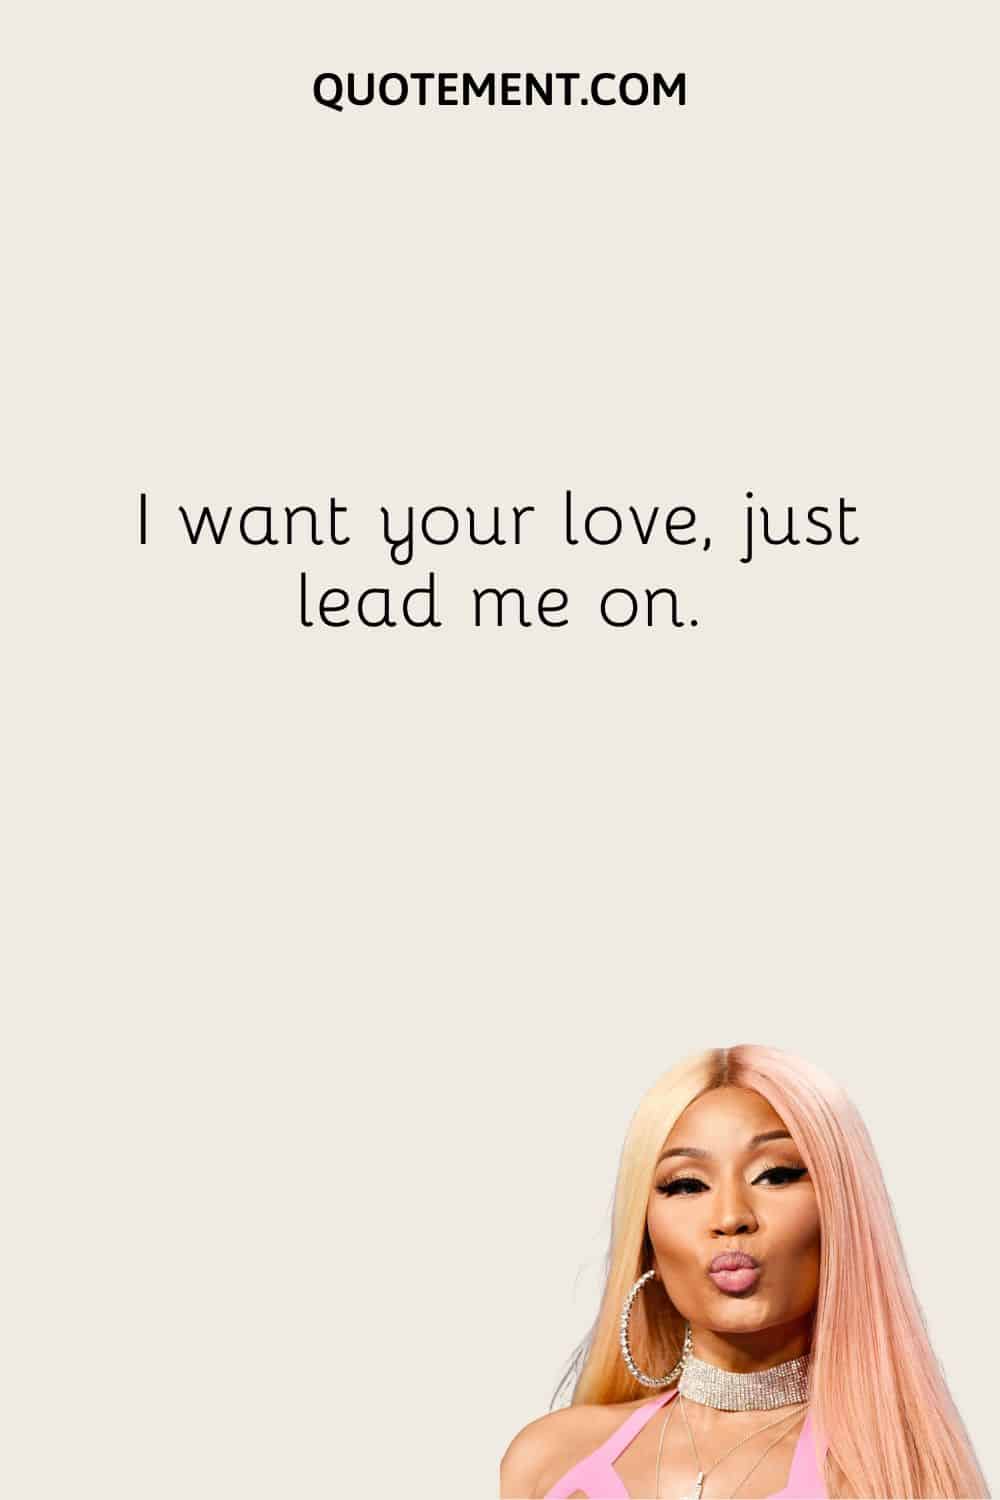 I want your love, just lead me on